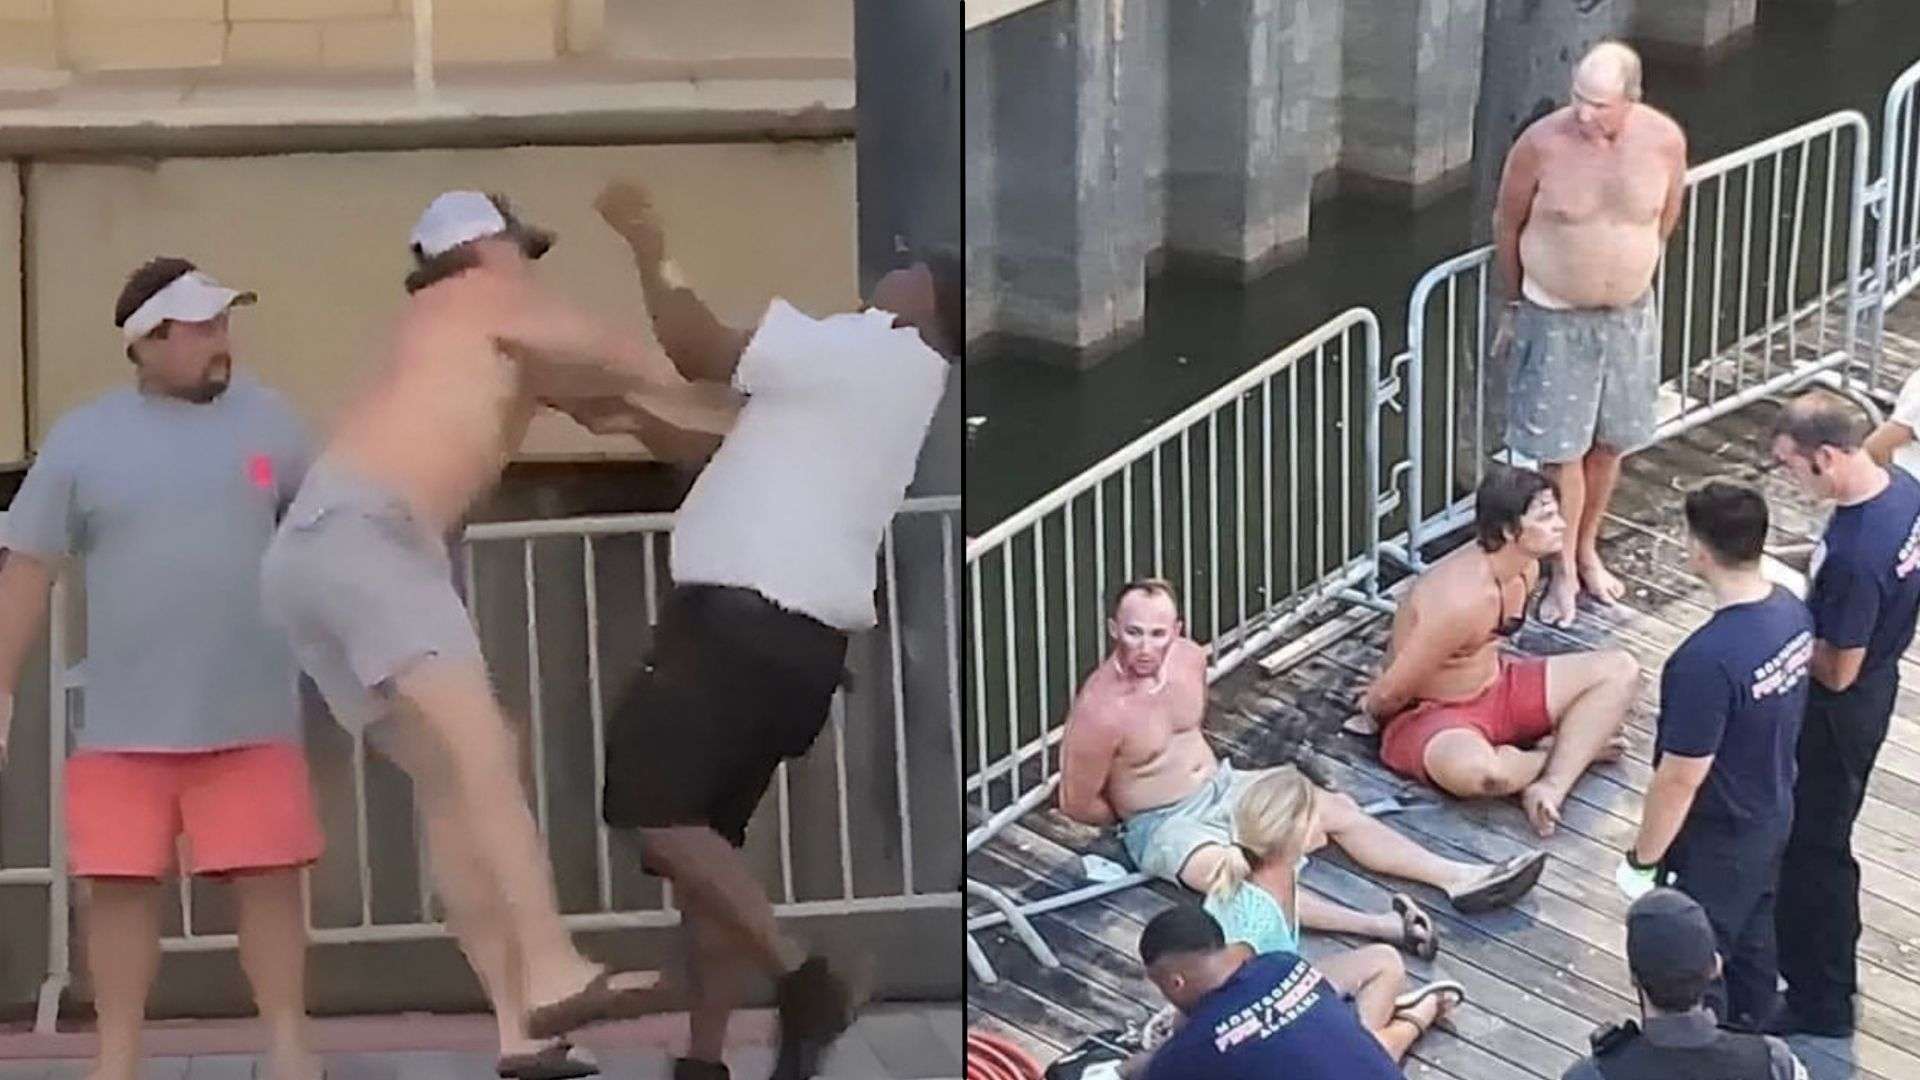 People fighting and being detained by police after viral riverfront brawl